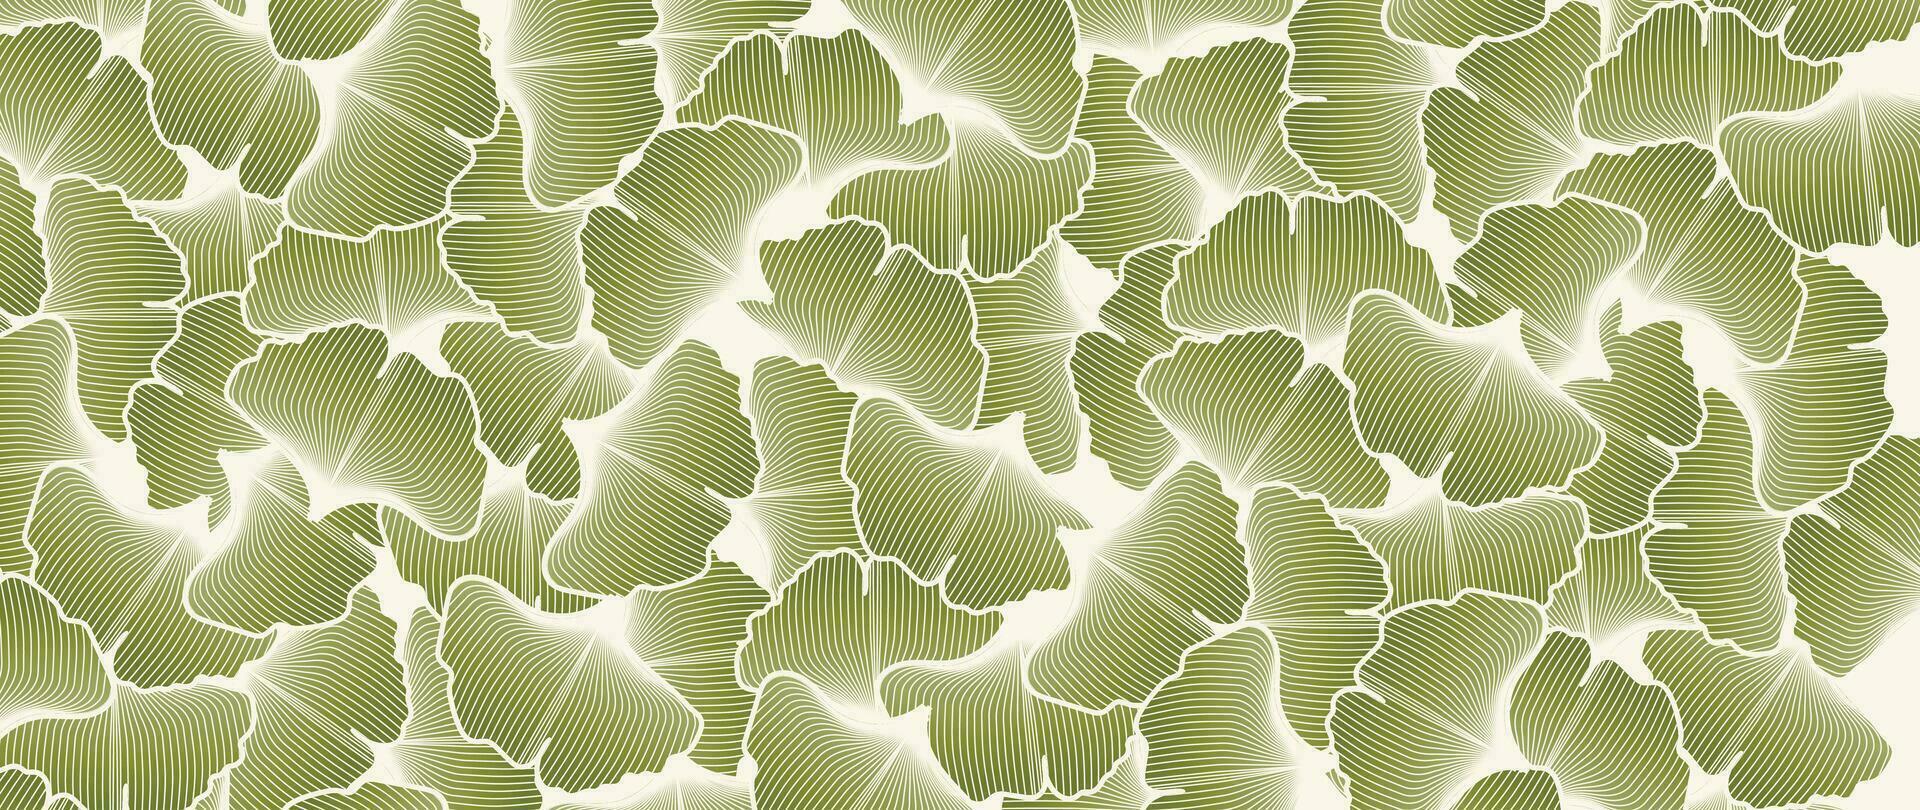 Abstract foliage line art vector background. Leaf wallpaper of ginkgo leaves, leaf branch, plants in hand drawn pattern. Botanical jungle illustrated for banner, prints, decoration, fabric.